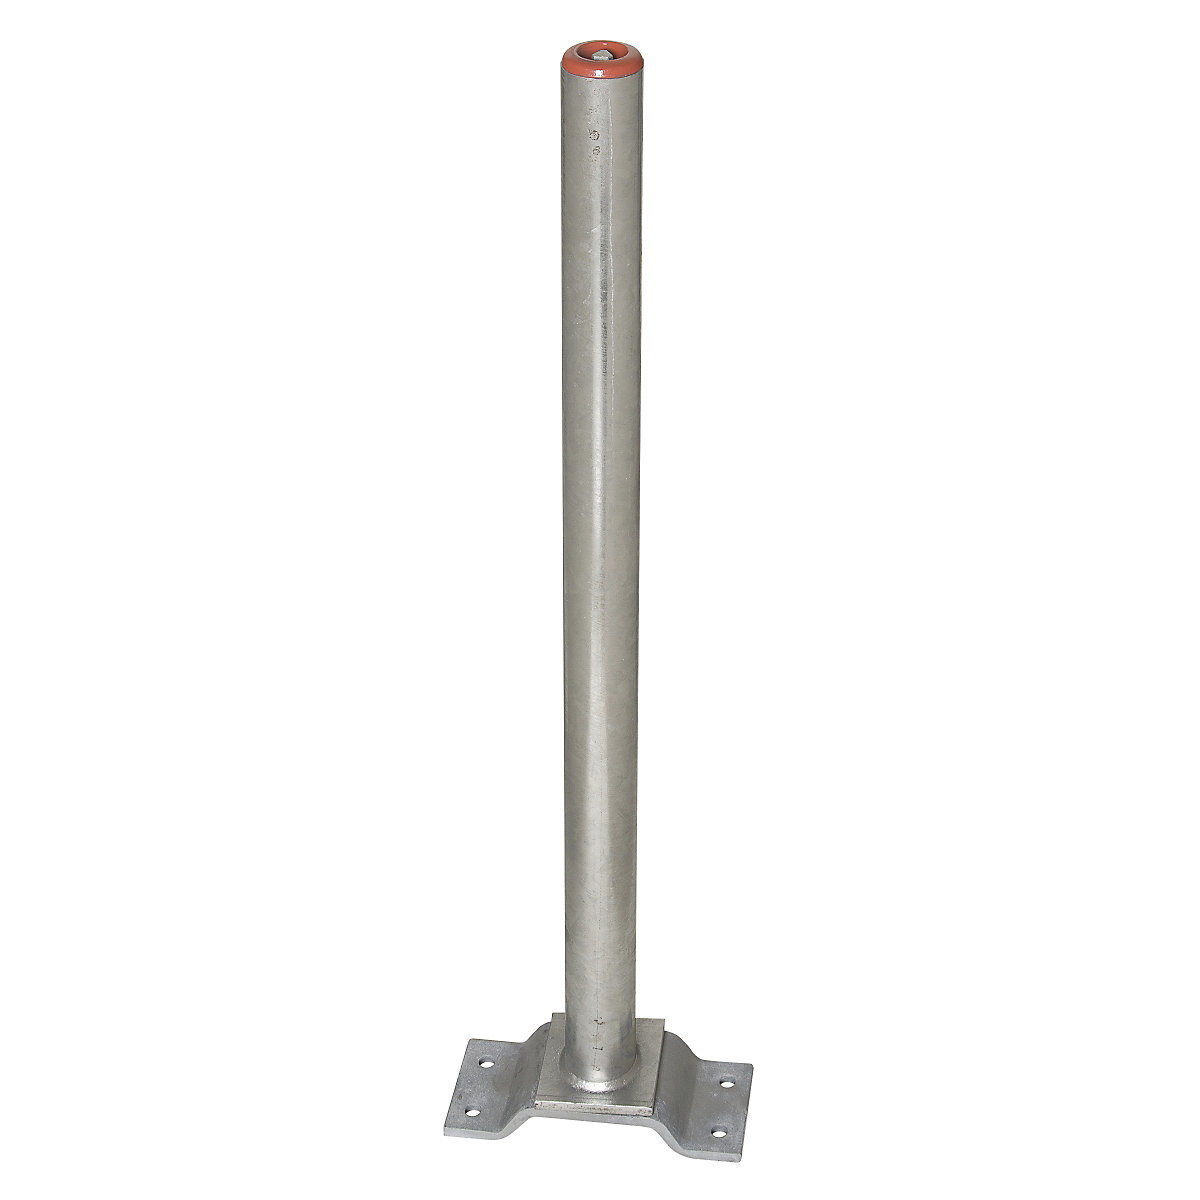 Barrier post made of steel, for bolting in place, Ø 60 mm, hot dip galvanised, 2 chain eyelets-7